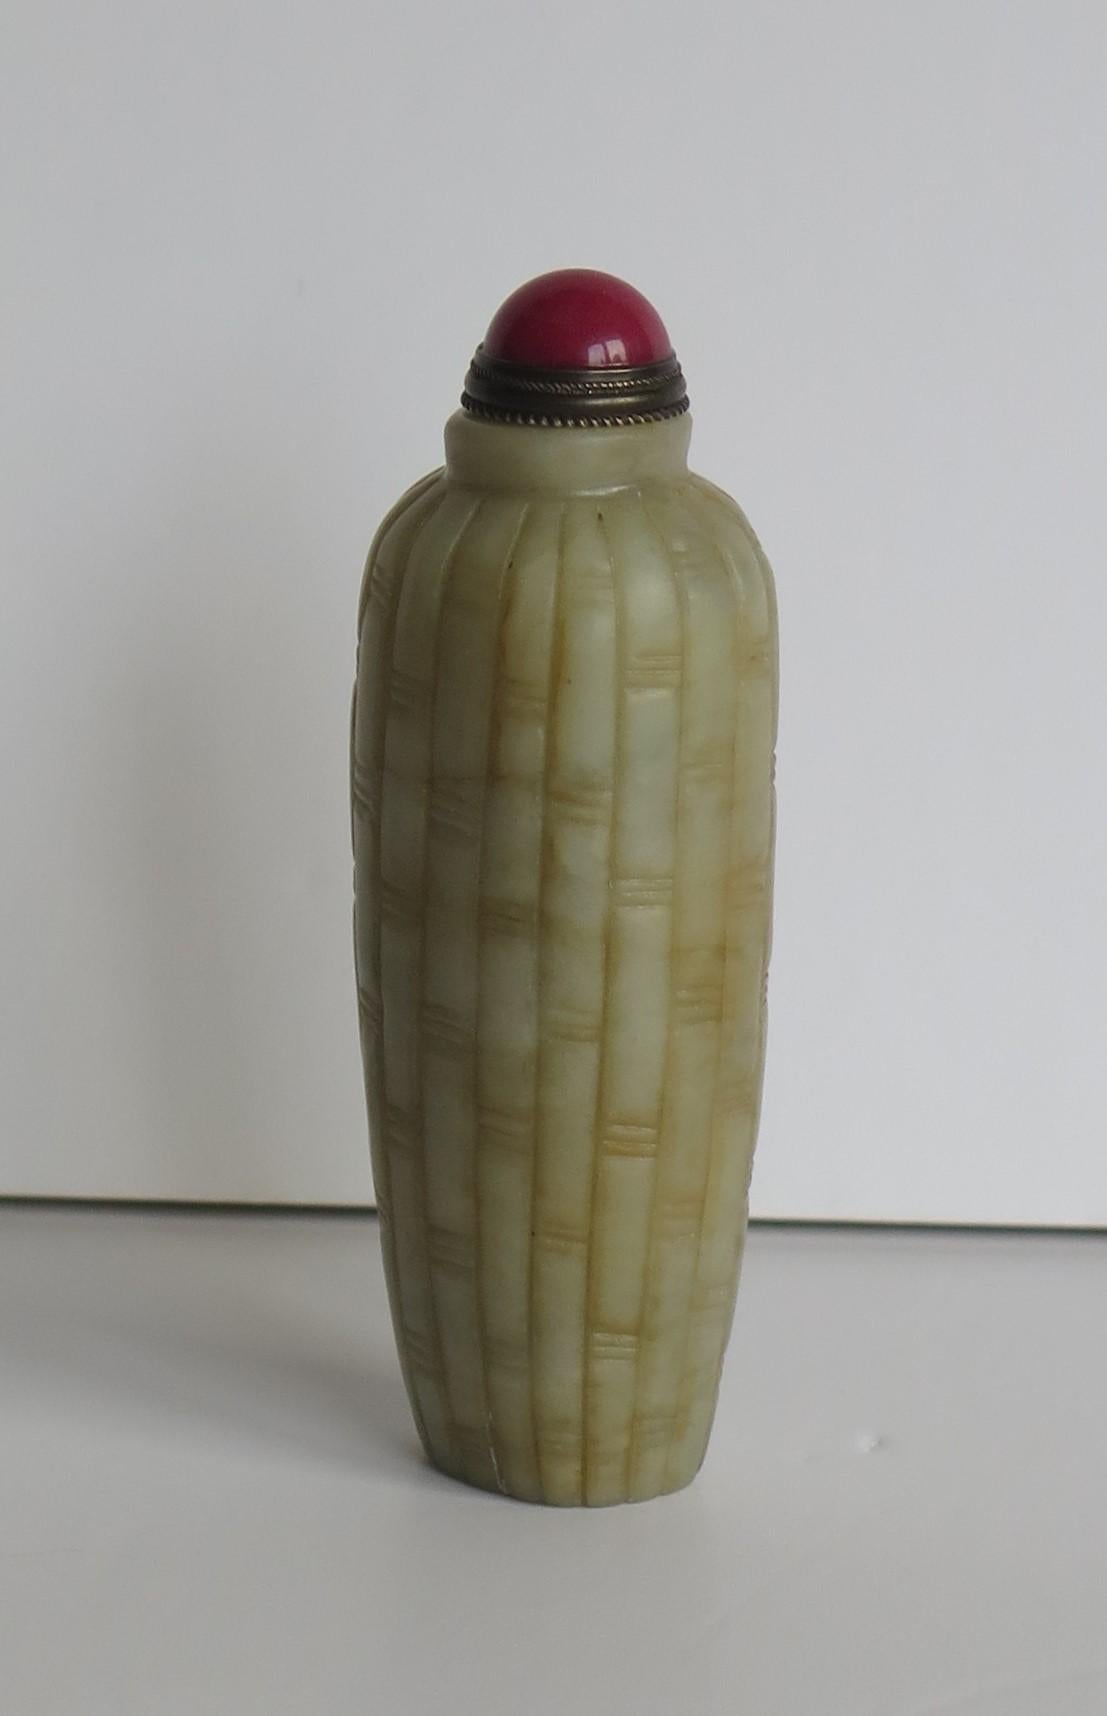 20th Century Chinese Snuff Bottle Hand Carved Natural Serpentine Stone Spoon Top, circa 1920